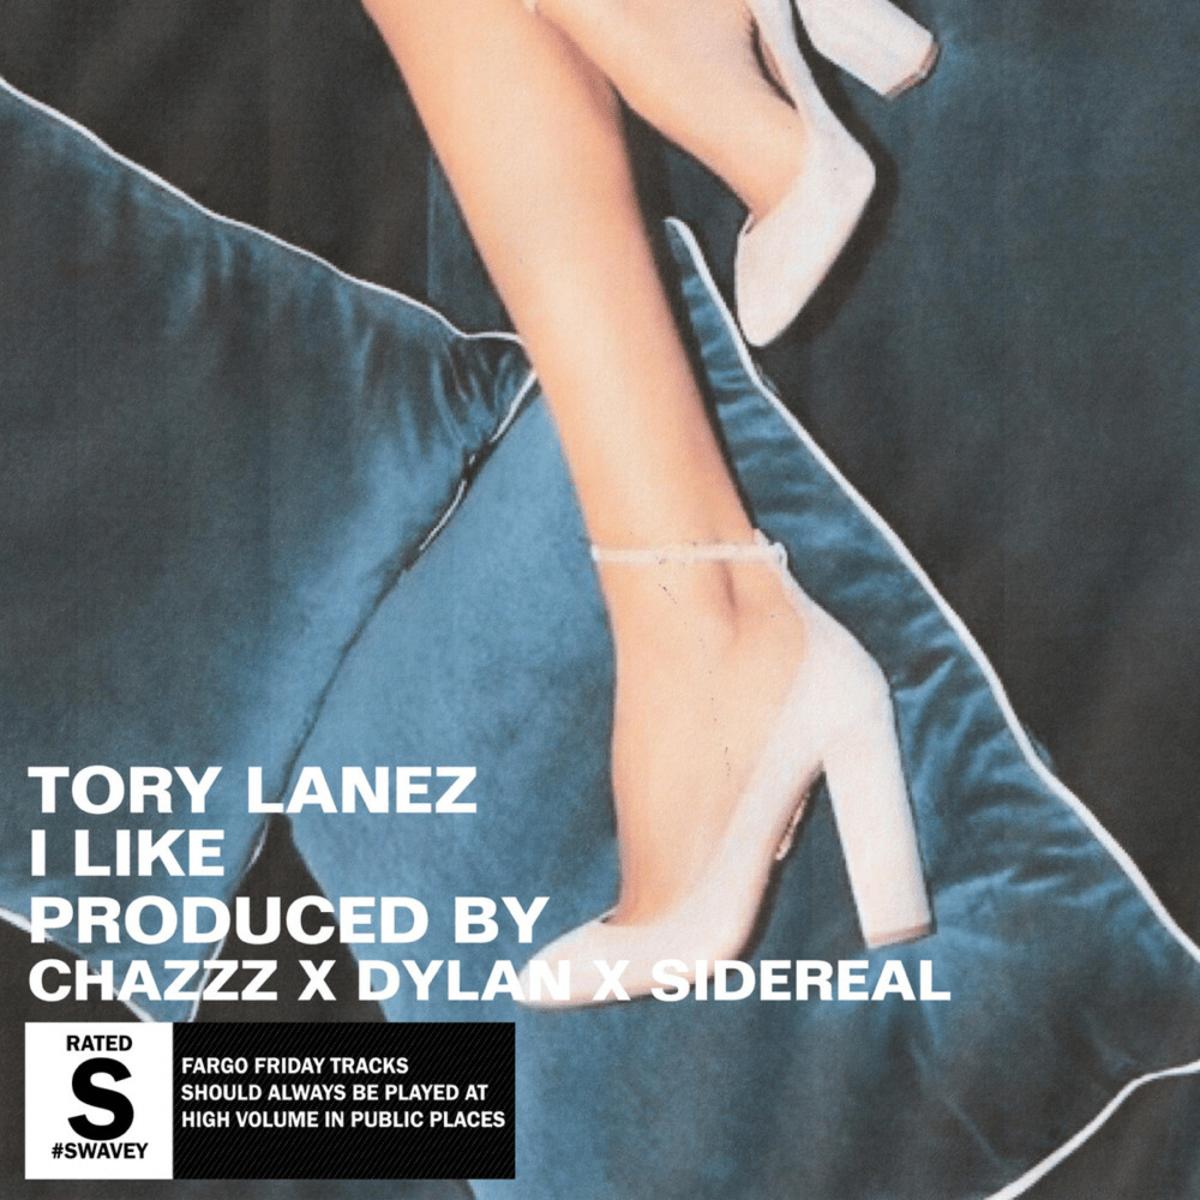 Tory Lanez Goes The R&B Route For “I LIKE”